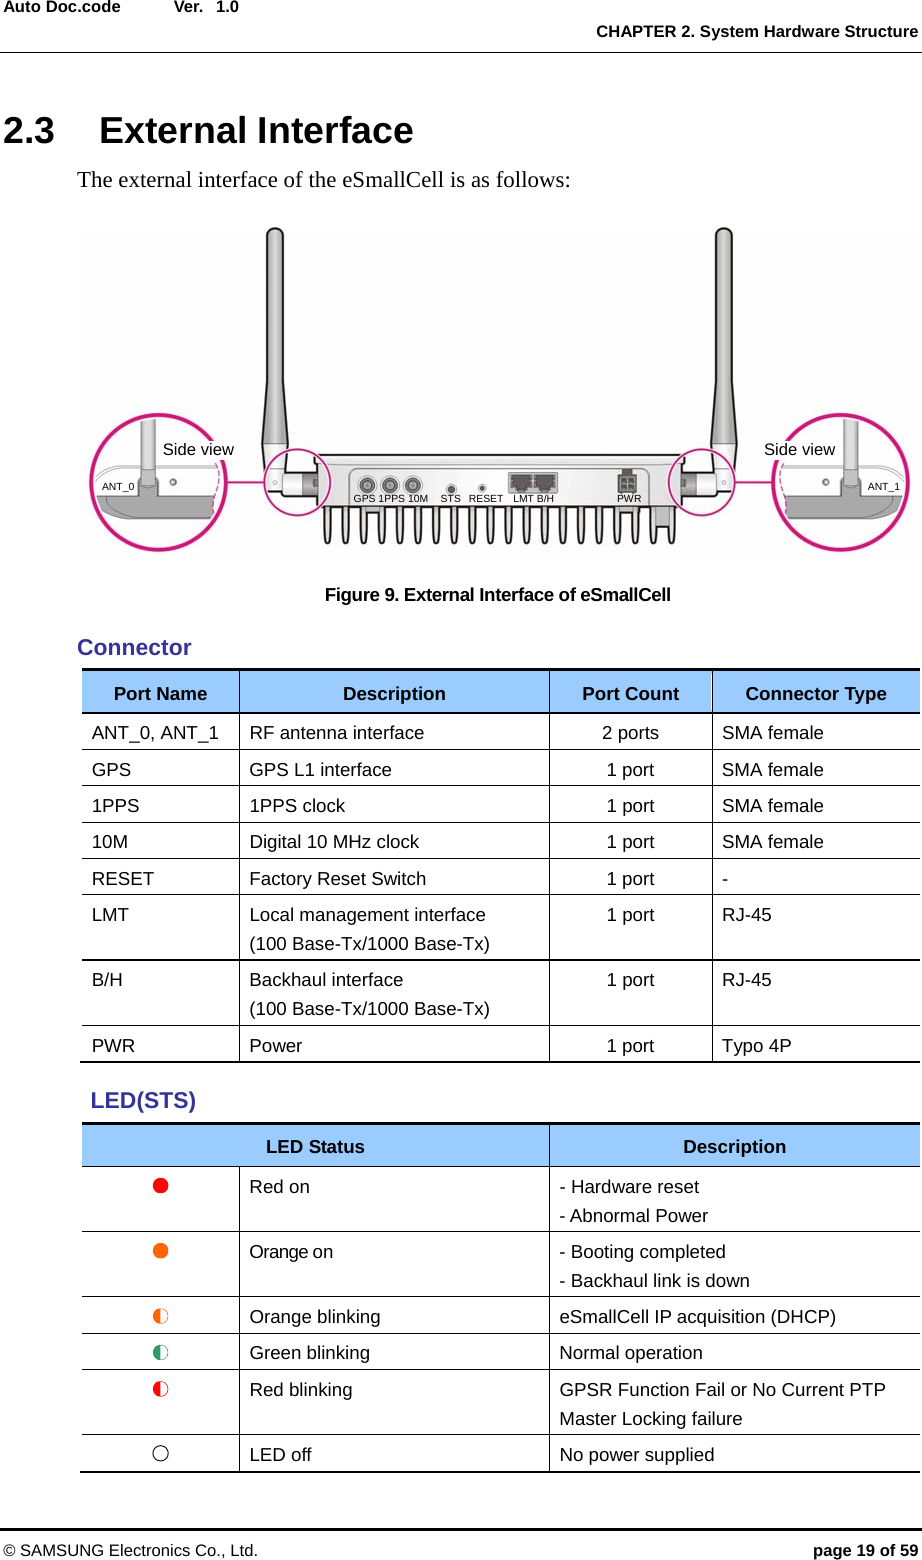  Ver.  CHAPTER 2. System Hardware Structure © SAMSUNG Electronics Co., Ltd.  page 19 of 59 Auto Doc.code  1.0 2.3 External Interface The external interface of the eSmallCell is as follows:  Figure 9. External Interface of eSmallCell  Connector Port Name  Description  Port Count  Connector Type ANT_0, ANT_1  RF antenna interface  2 ports  SMA female GPS  GPS L1 interface  1 port  SMA female 1PPS  1PPS clock  1 port  SMA female 10M  Digital 10 MHz clock  1 port  SMA female RESET  Factory Reset Switch  1 port  - LMT  Local management interface (100 Base-Tx/1000 Base-Tx) 1 port  RJ-45 B/H Backhaul interface  (100 Base-Tx/1000 Base-Tx) 1 port  RJ-45 PWR Power  1 port Typo 4P  LED(STS) LED Status Description  Red on  - Hardware reset   - Abnormal Power    Orange on  - Booting completed - Backhaul link is down    Orange blinking  eSmallCell IP acquisition (DHCP)    Green blinking  Normal operation    Red blinking  GPSR Function Fail or No Current PTP Master Locking failure  LED off  No power supplied   Side view  Side view ANT_0  ANT_1 GPS 1PPS 10M  STS  RESET  LMT B/H  PWR 